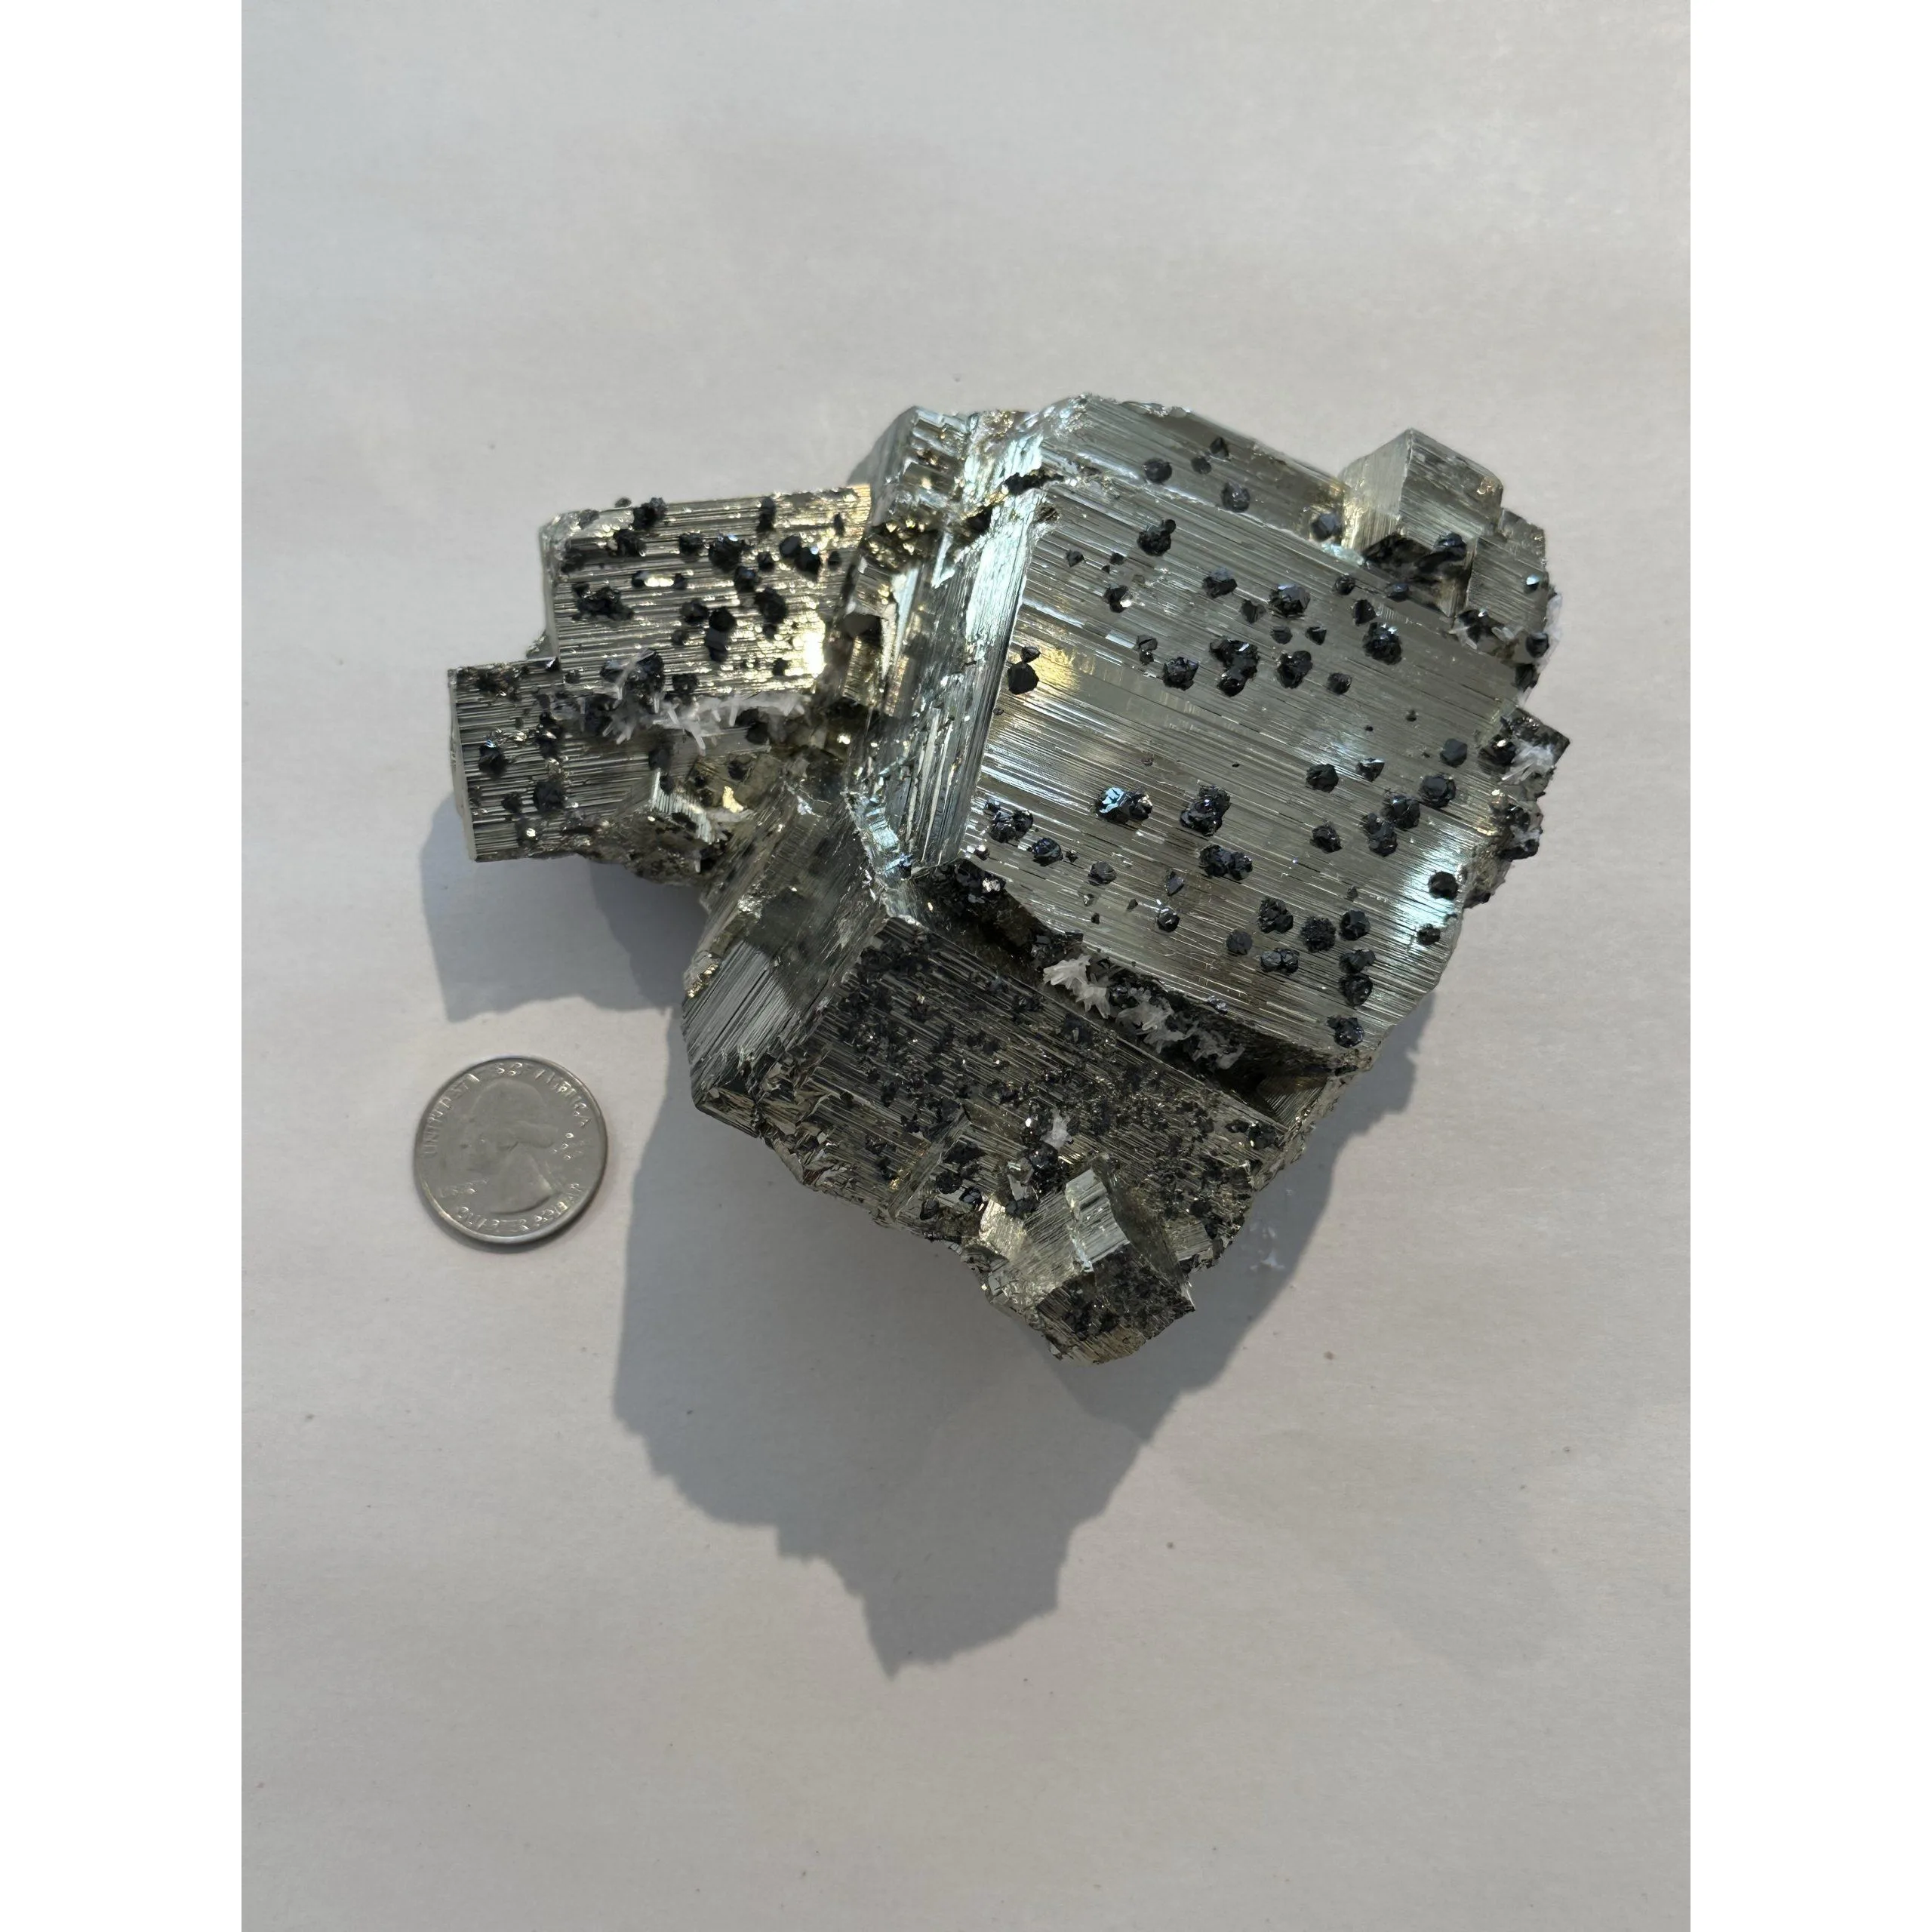 Pyrite with Galena Prehistoric Online